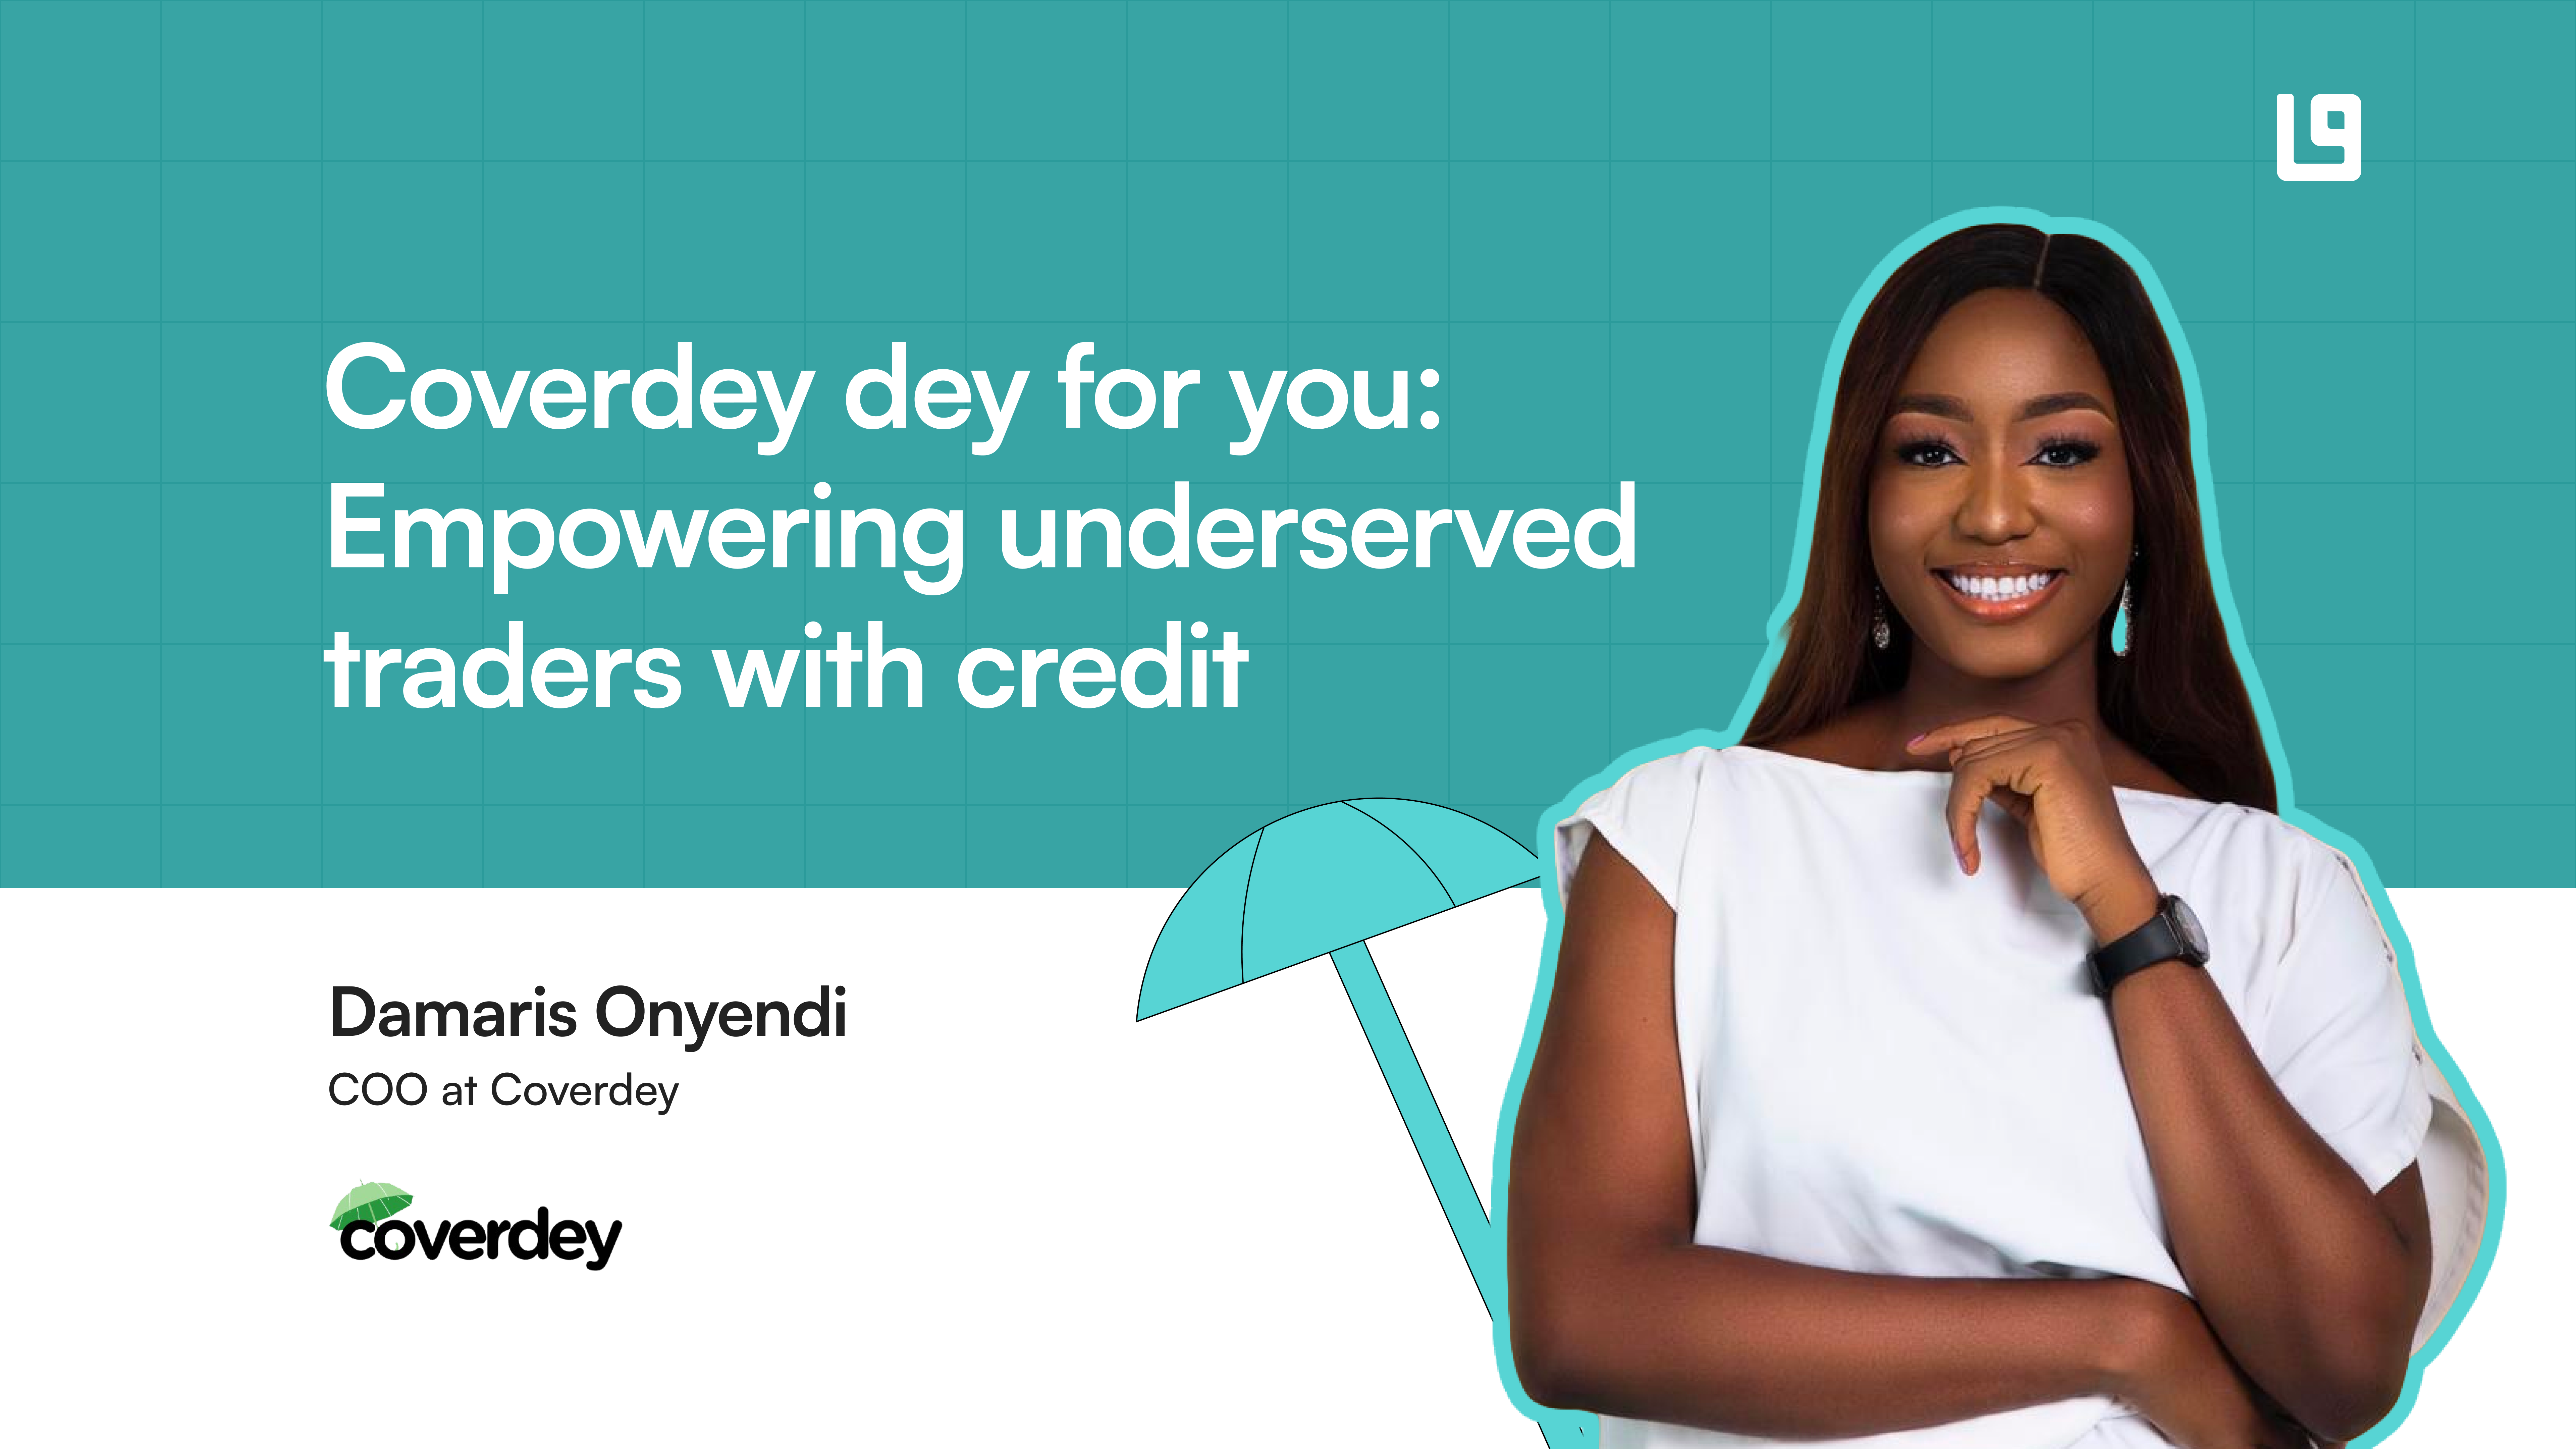 Coverdey dey for you: Empowering underserved traders with credit